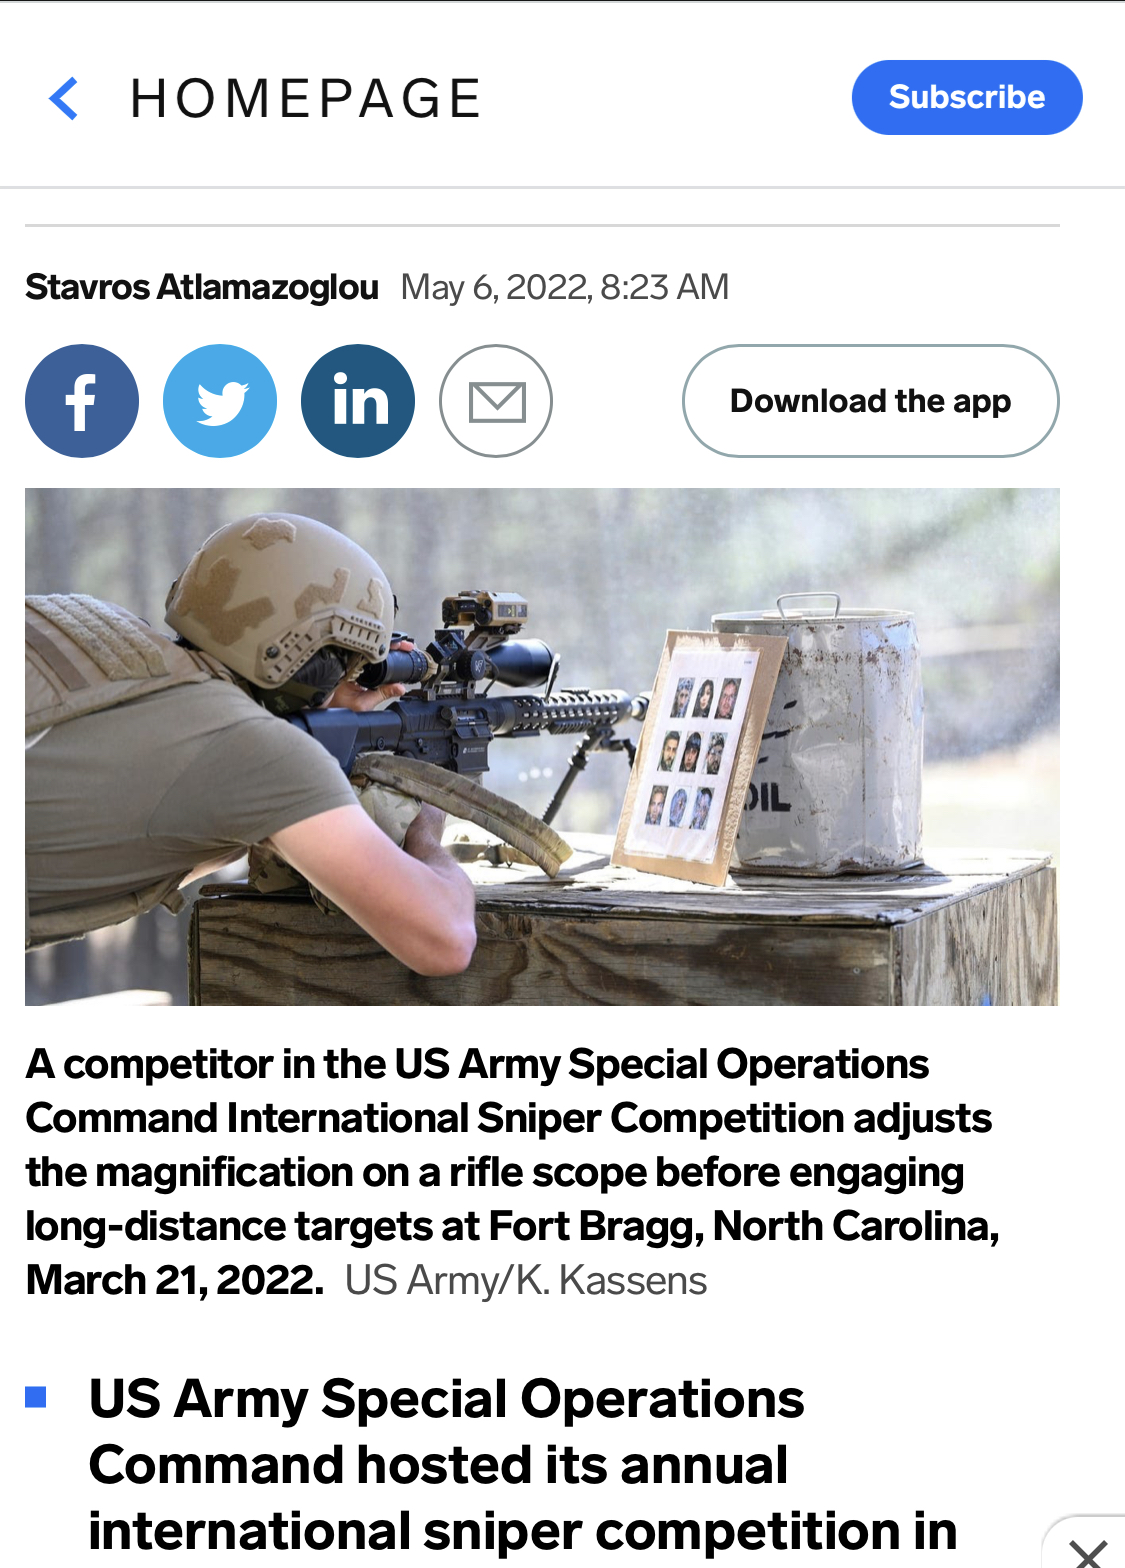 2022 US Army Special Operations Command International Sniper